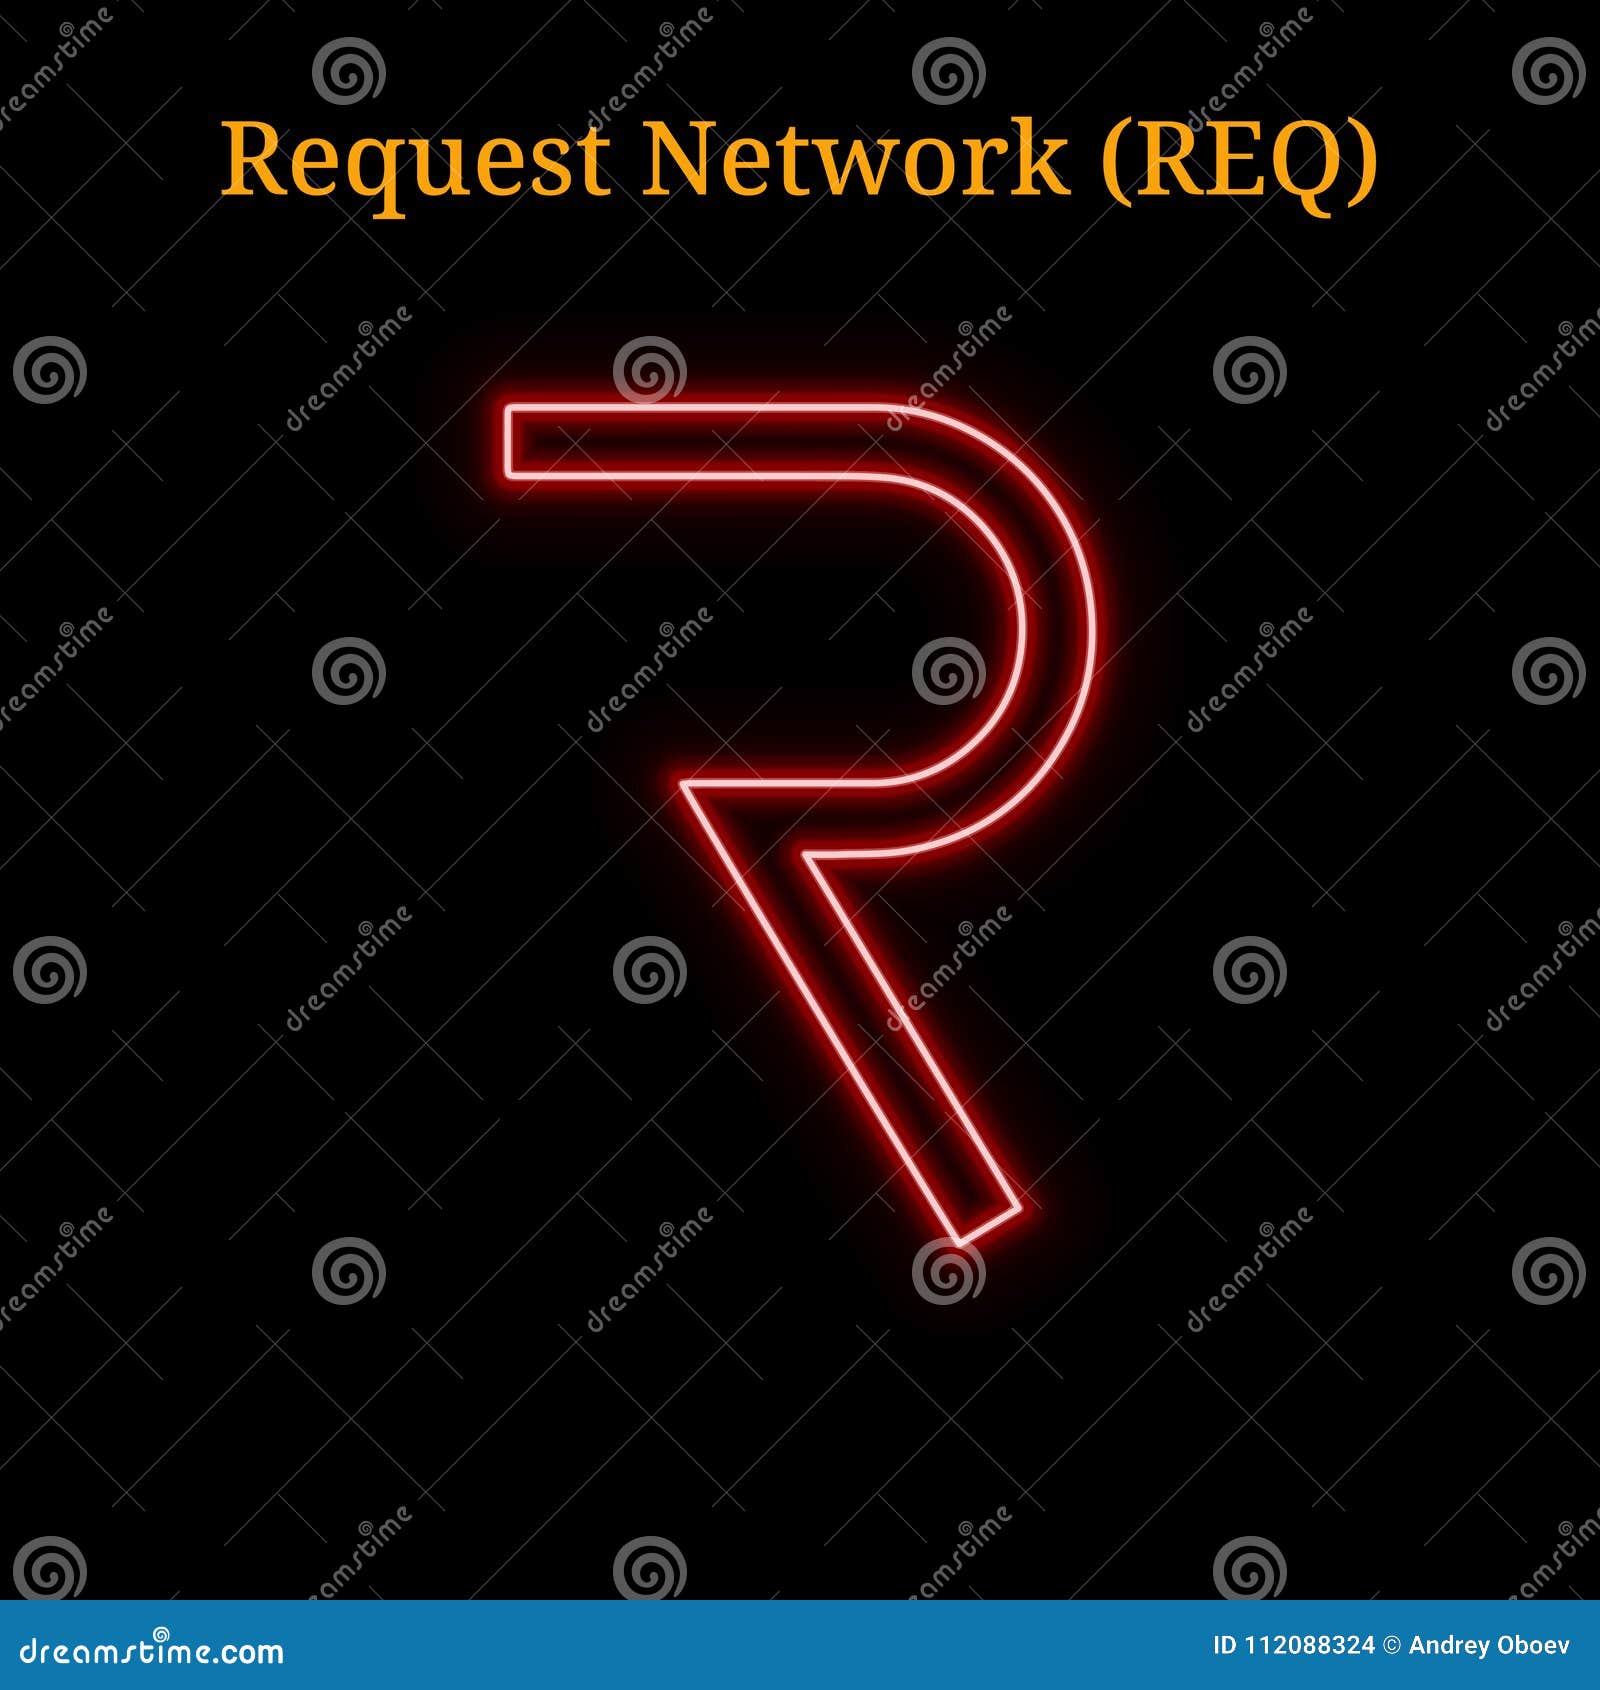 Red Neon Request Network (REQ) Cryptocurrency Symbol Stock ...